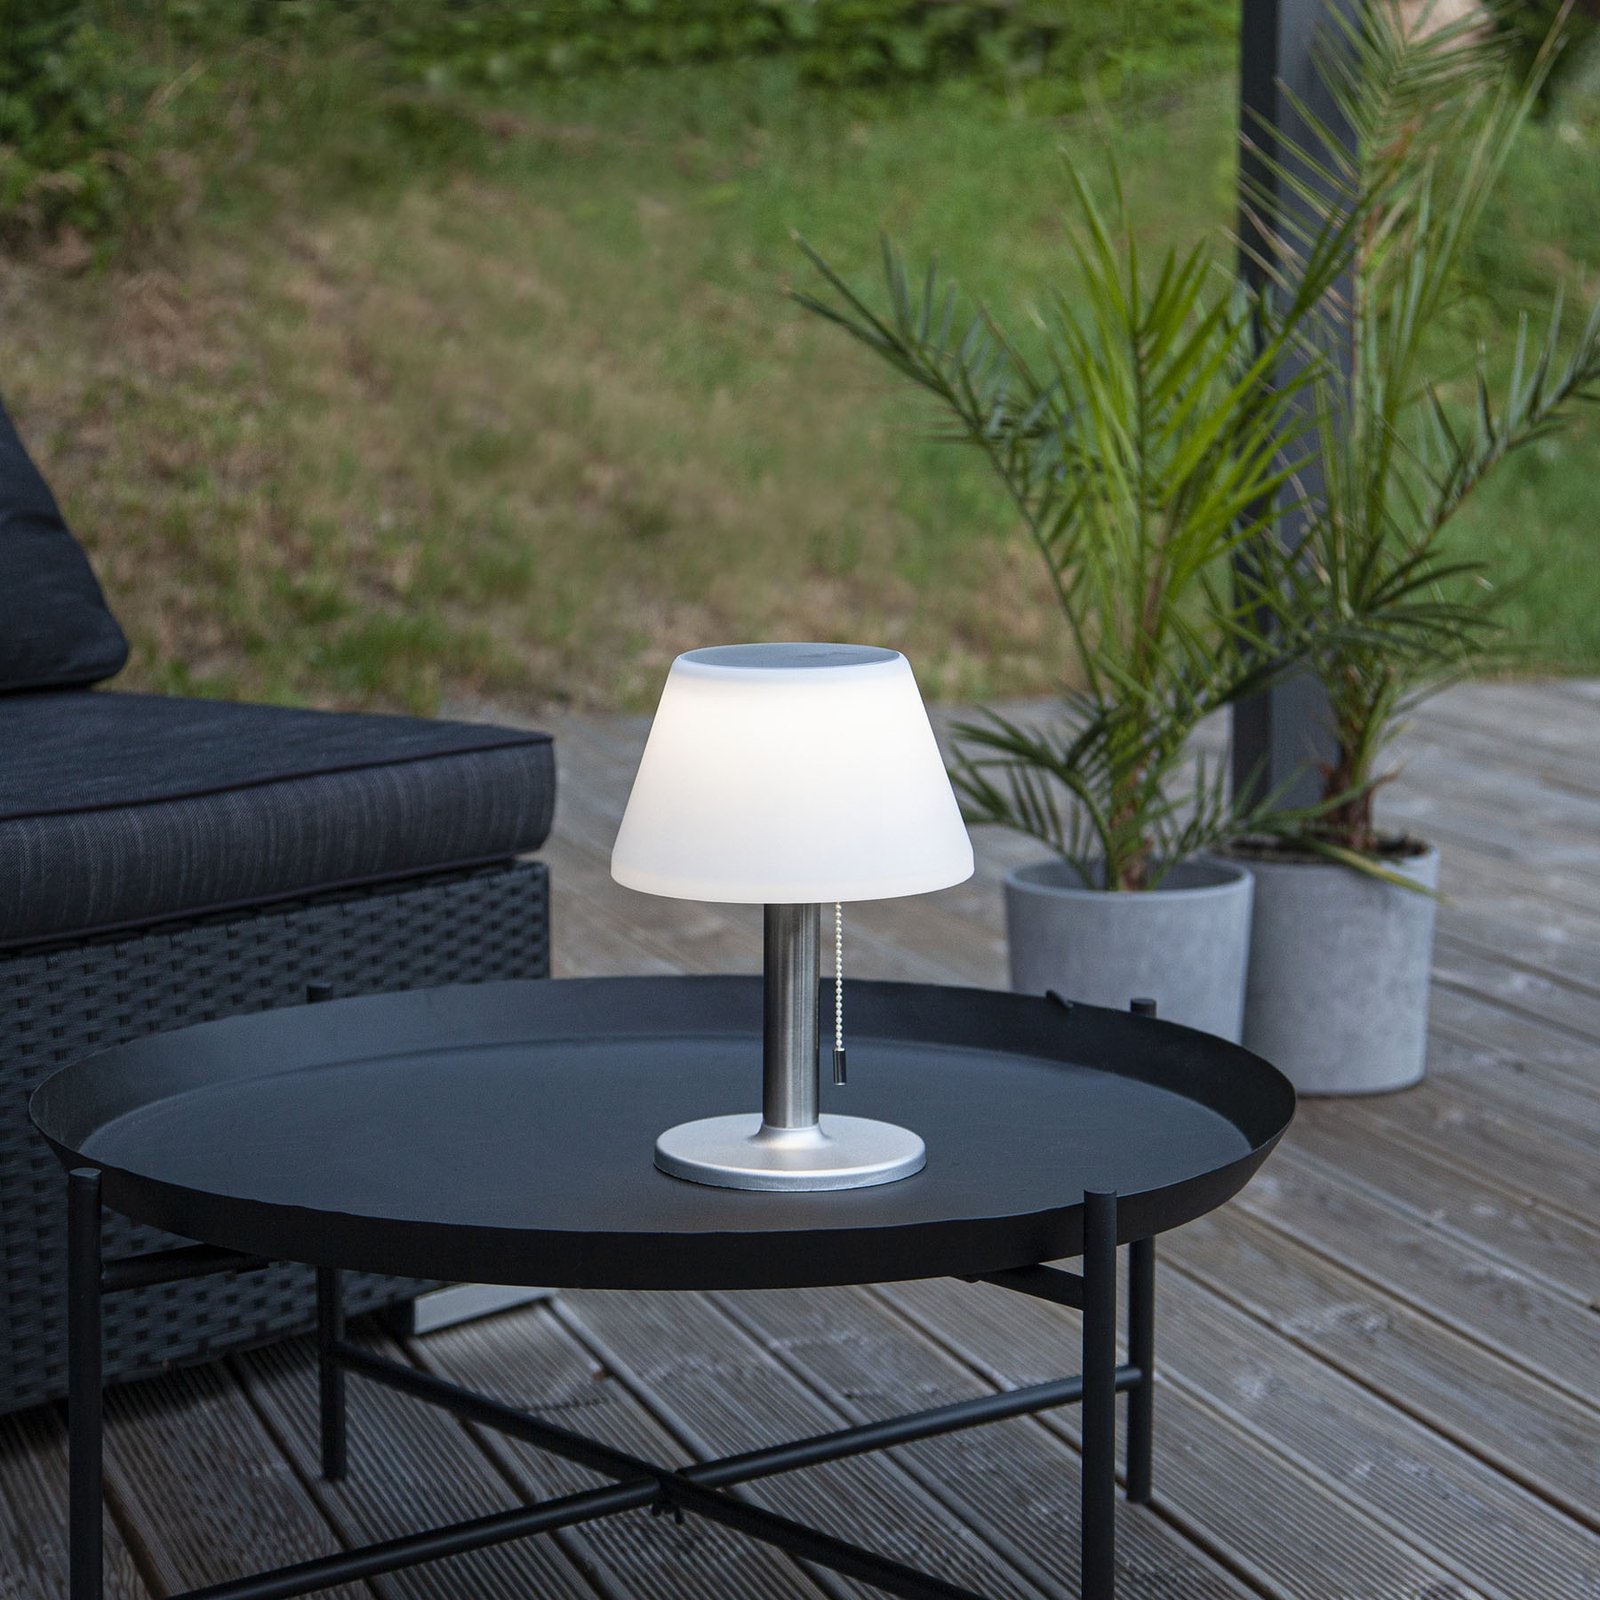 Solia LED solar table lamp with pull switch